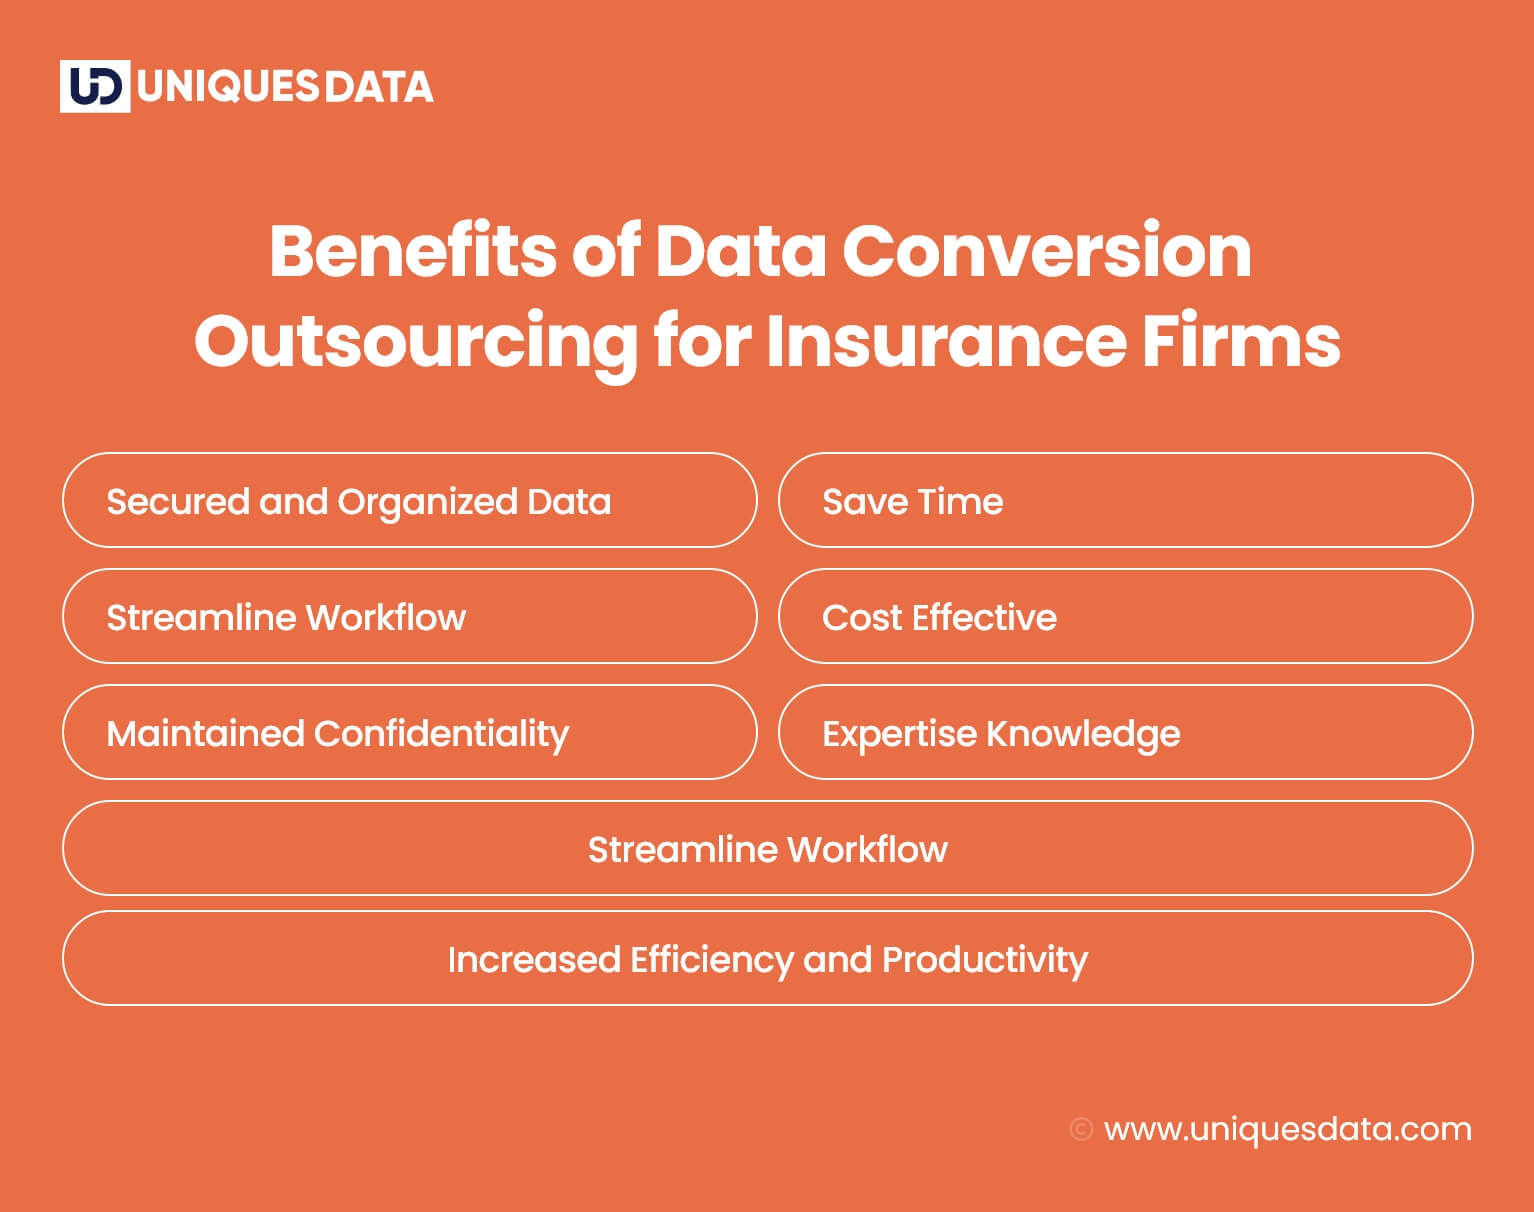 Benefits of Data Conversion Outsourcing for Insurance Firms